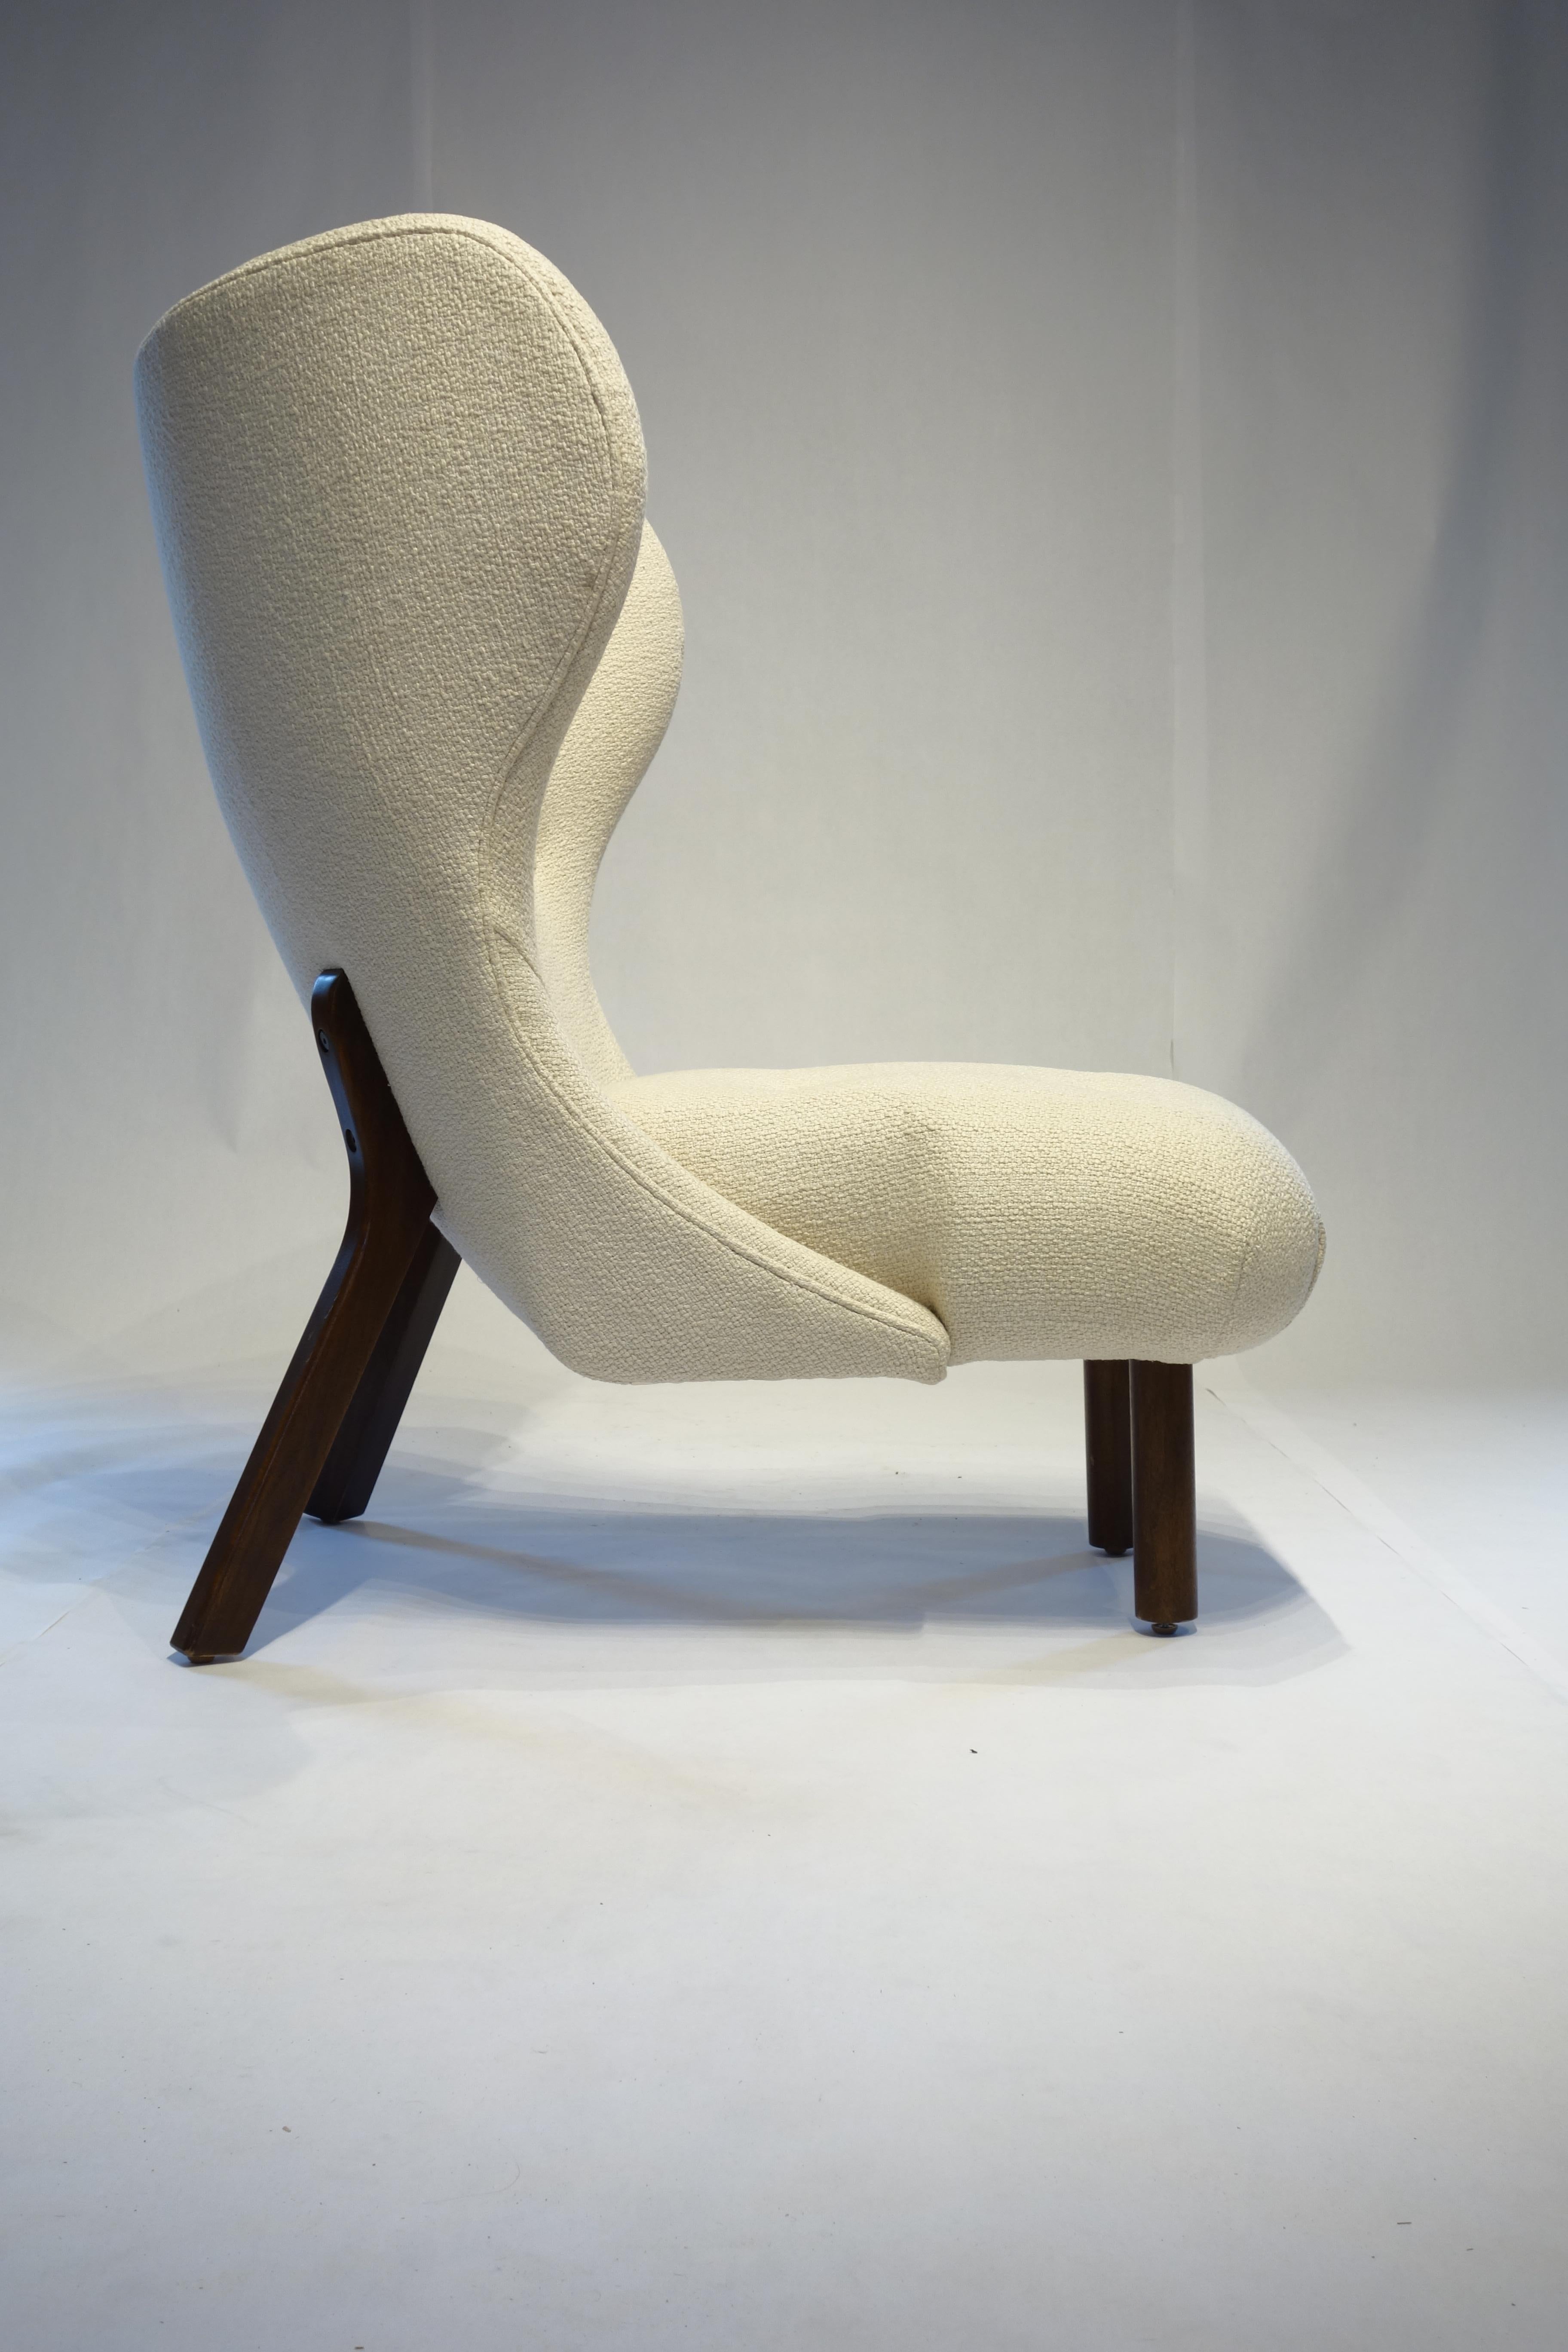 Contemporary Chair with unique details in woven linen made to order.